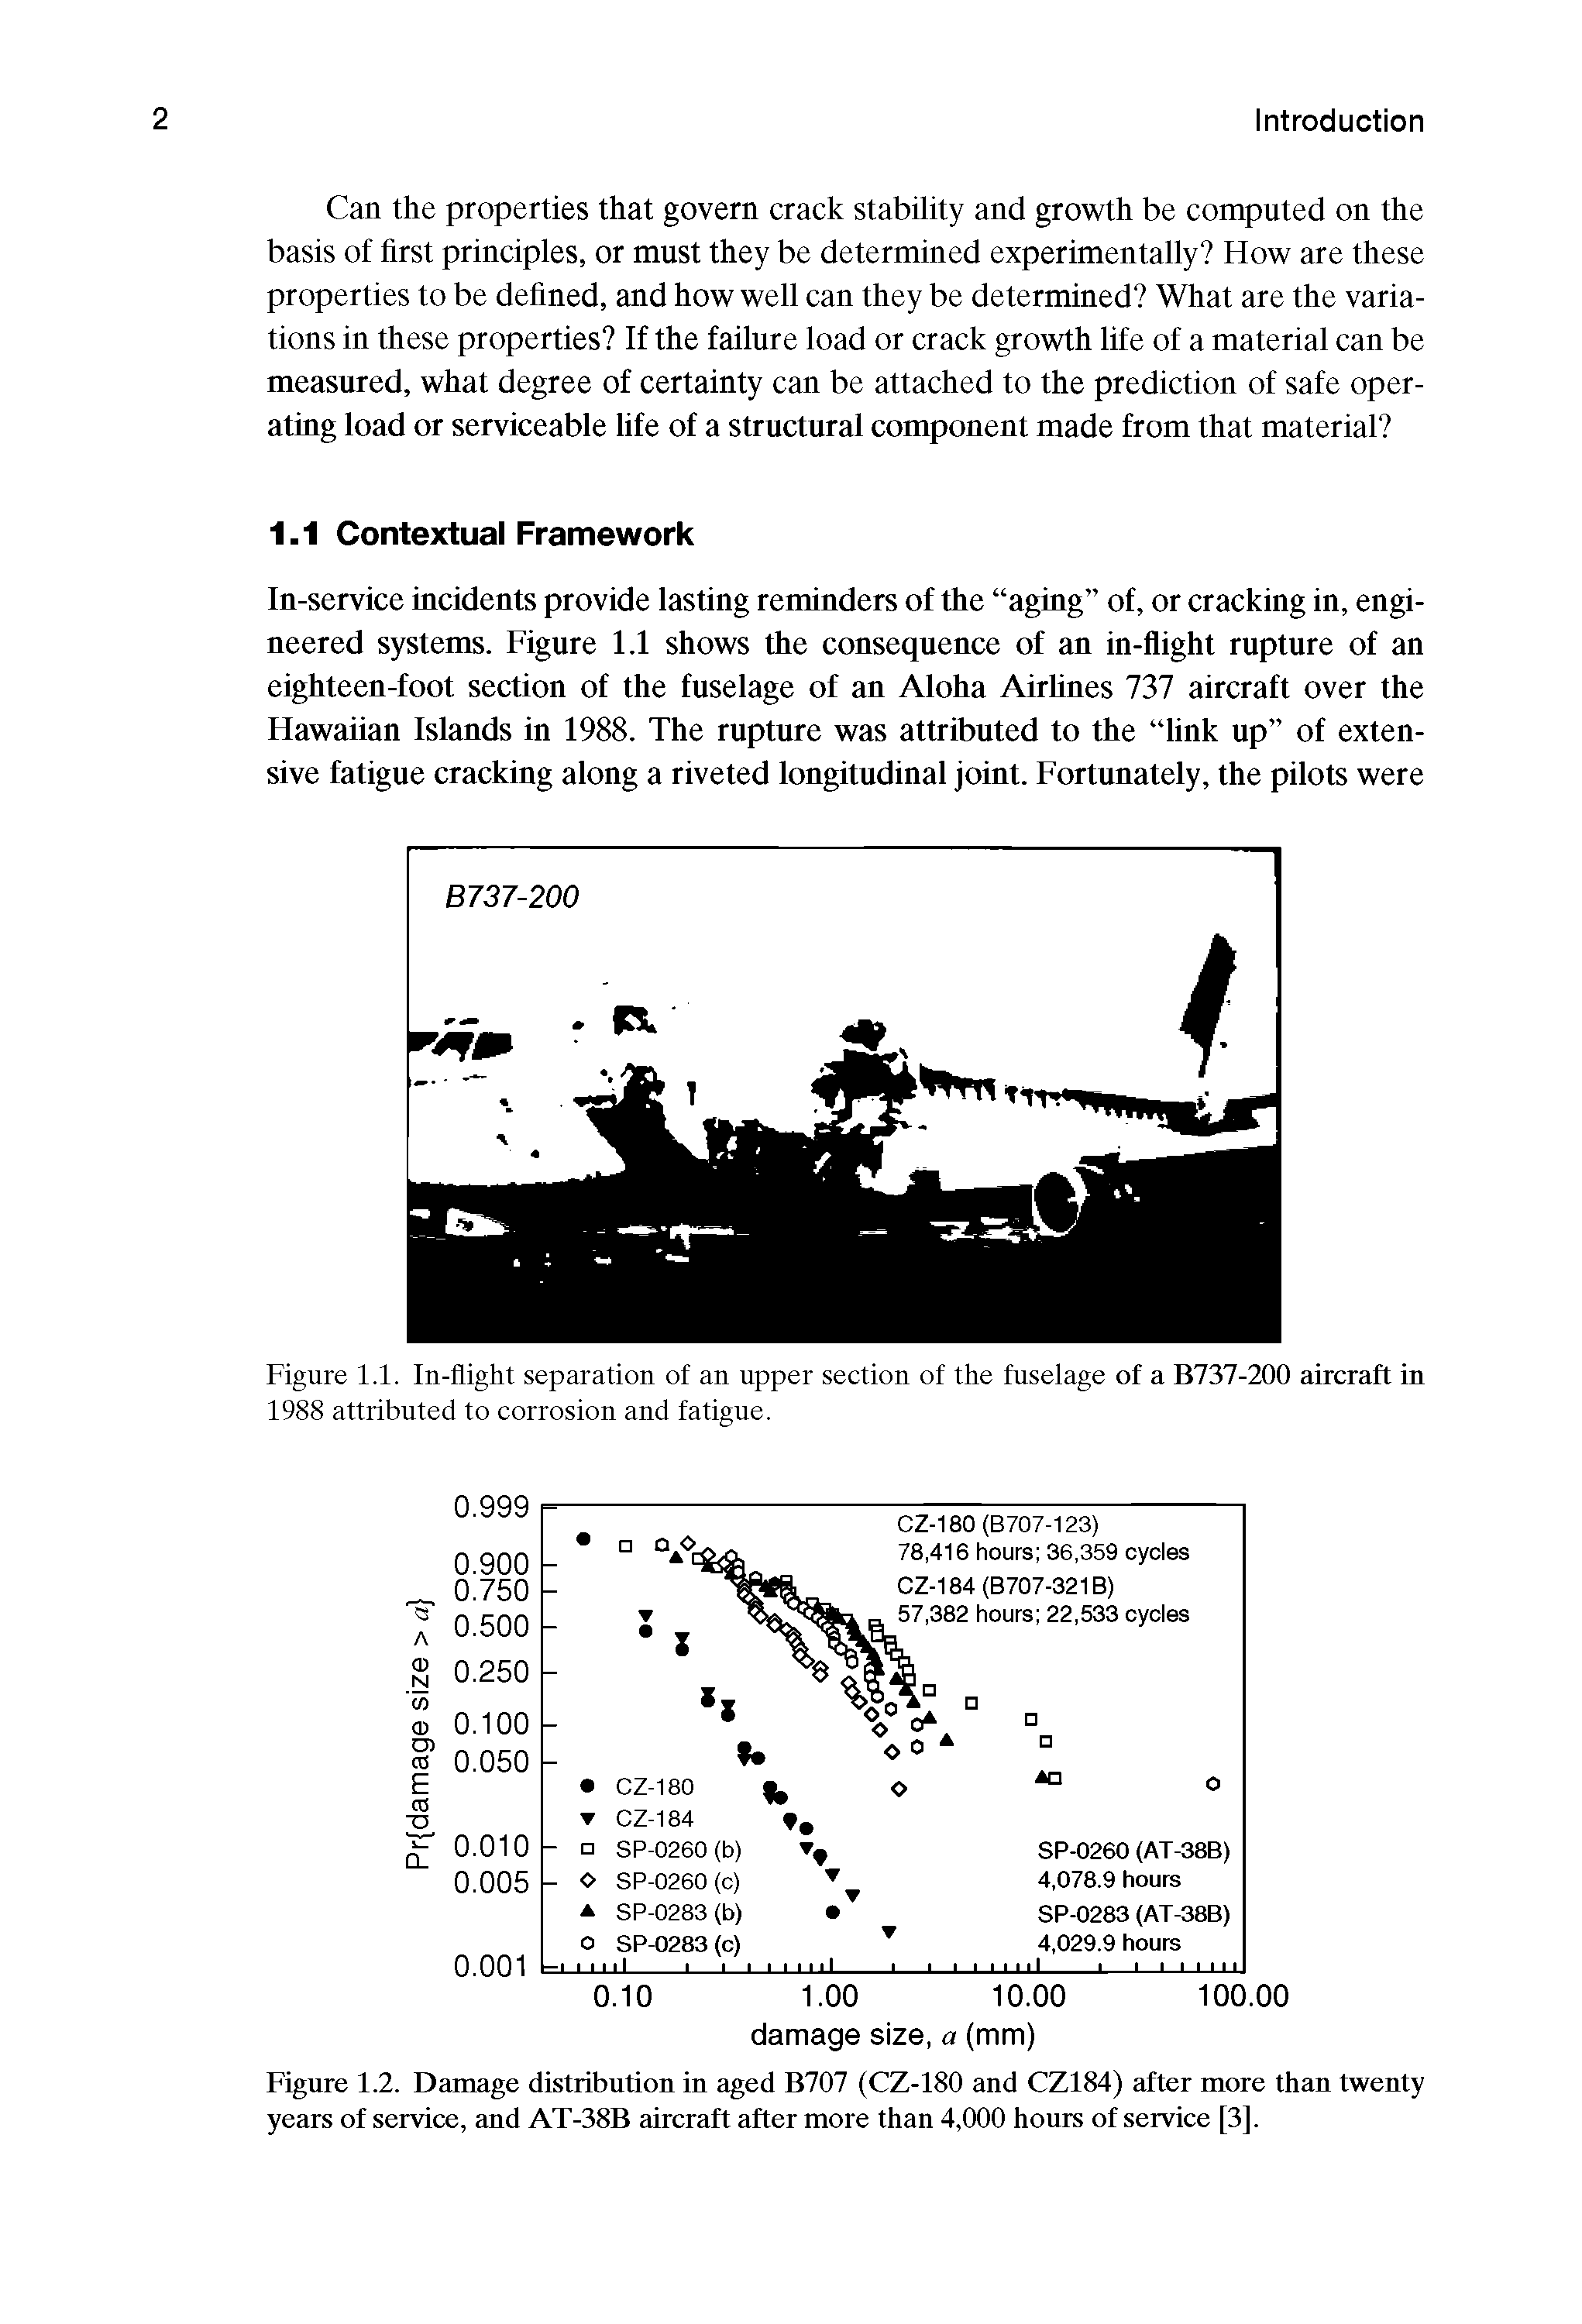 Figure 1.2. Damage distribution in aged B707 (CZ-180 and CZ184) after more than twenty years of service, and AT-38B aircraft after more than 4,000 hours of service [3].